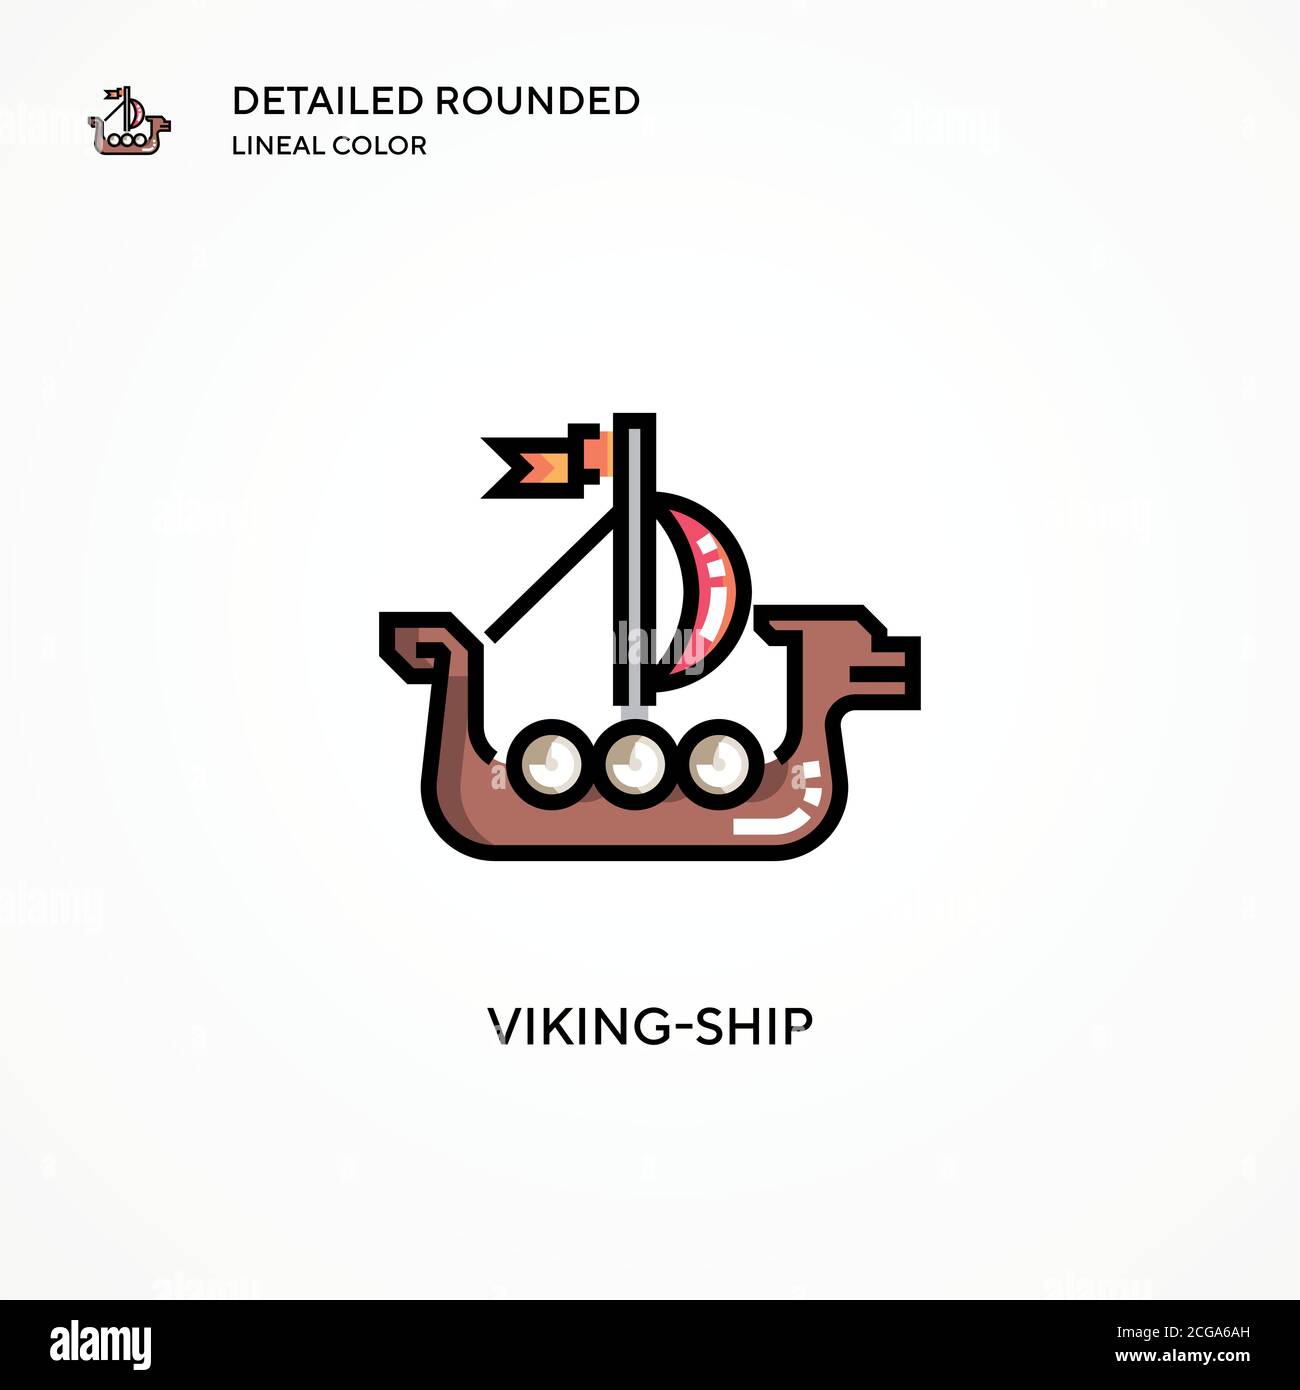 Viking-ship vector icon. Modern vector illustration concepts. Easy to edit and customize. Stock Vector